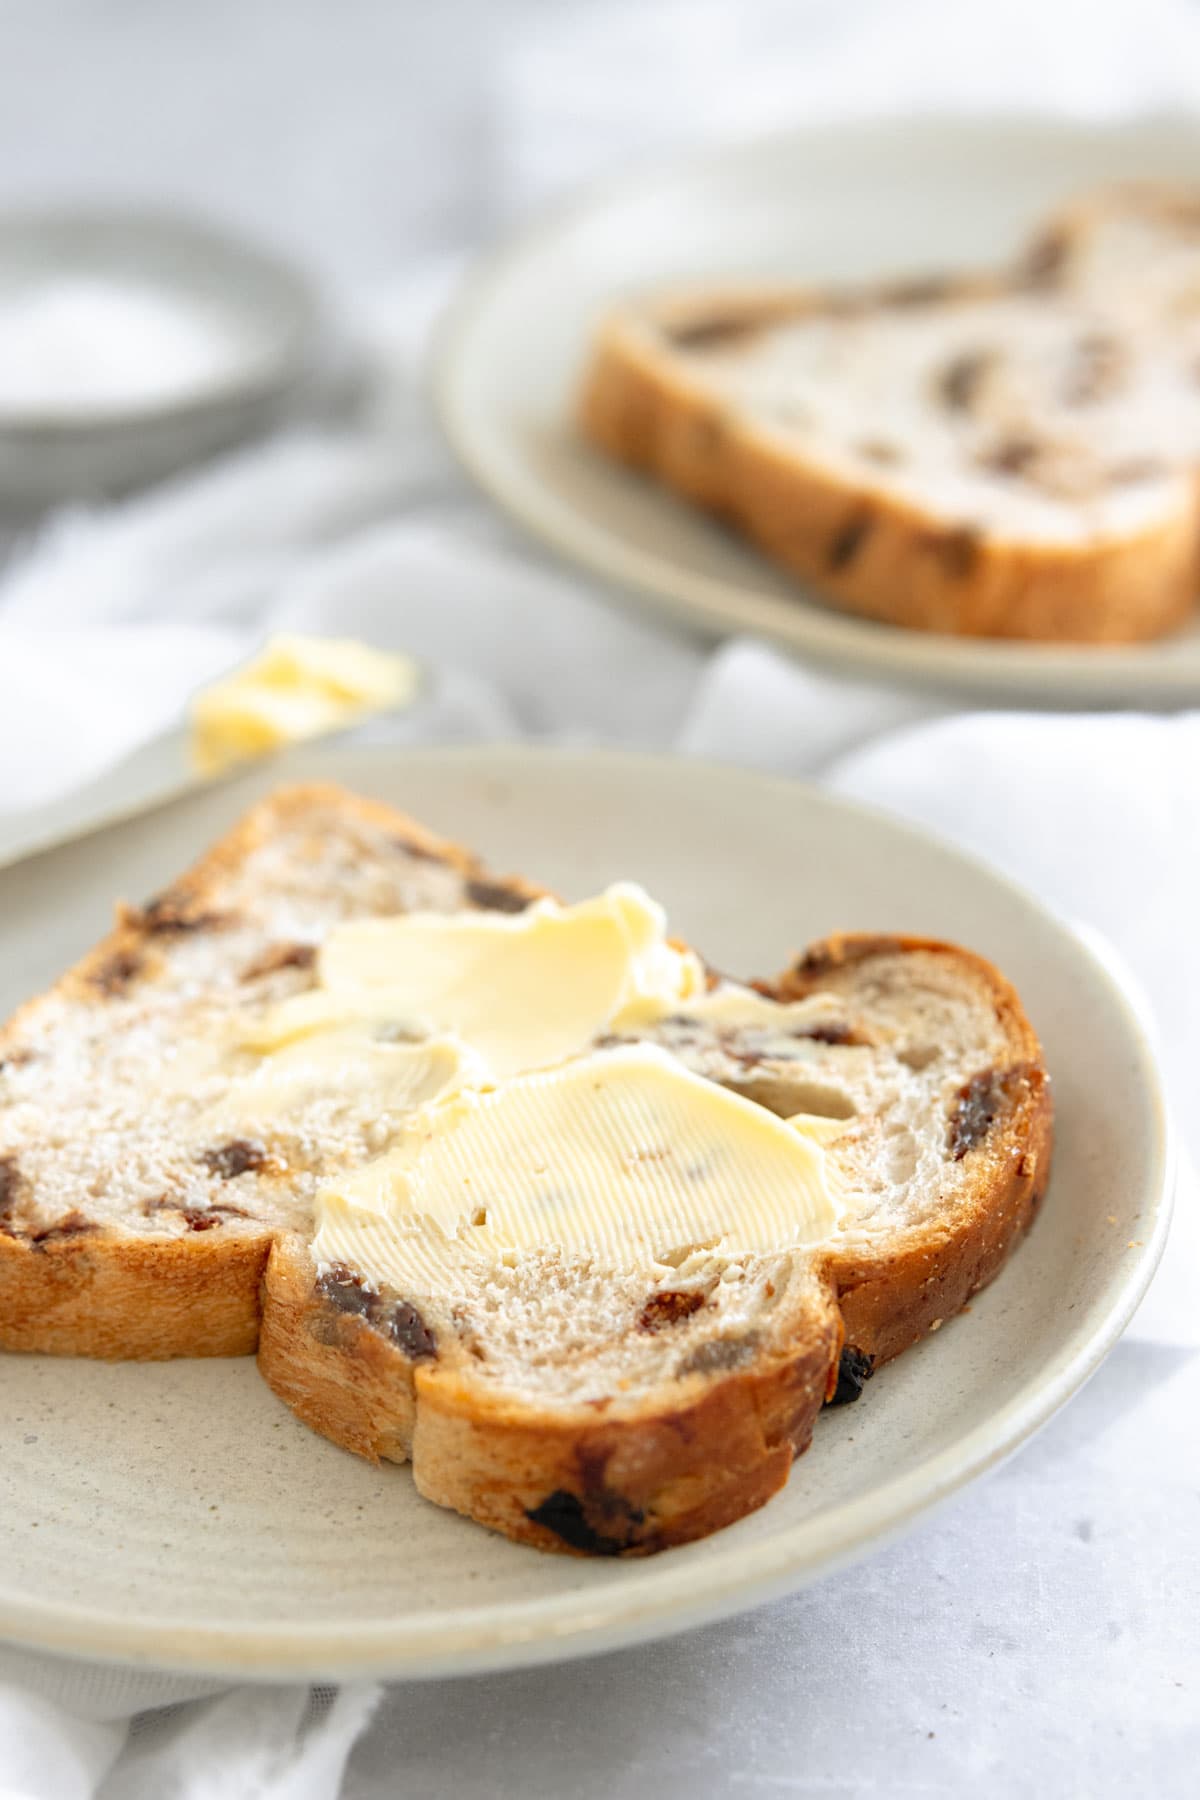 A slice of fruit loaf on a plate with a butter knife, spread with salted butter